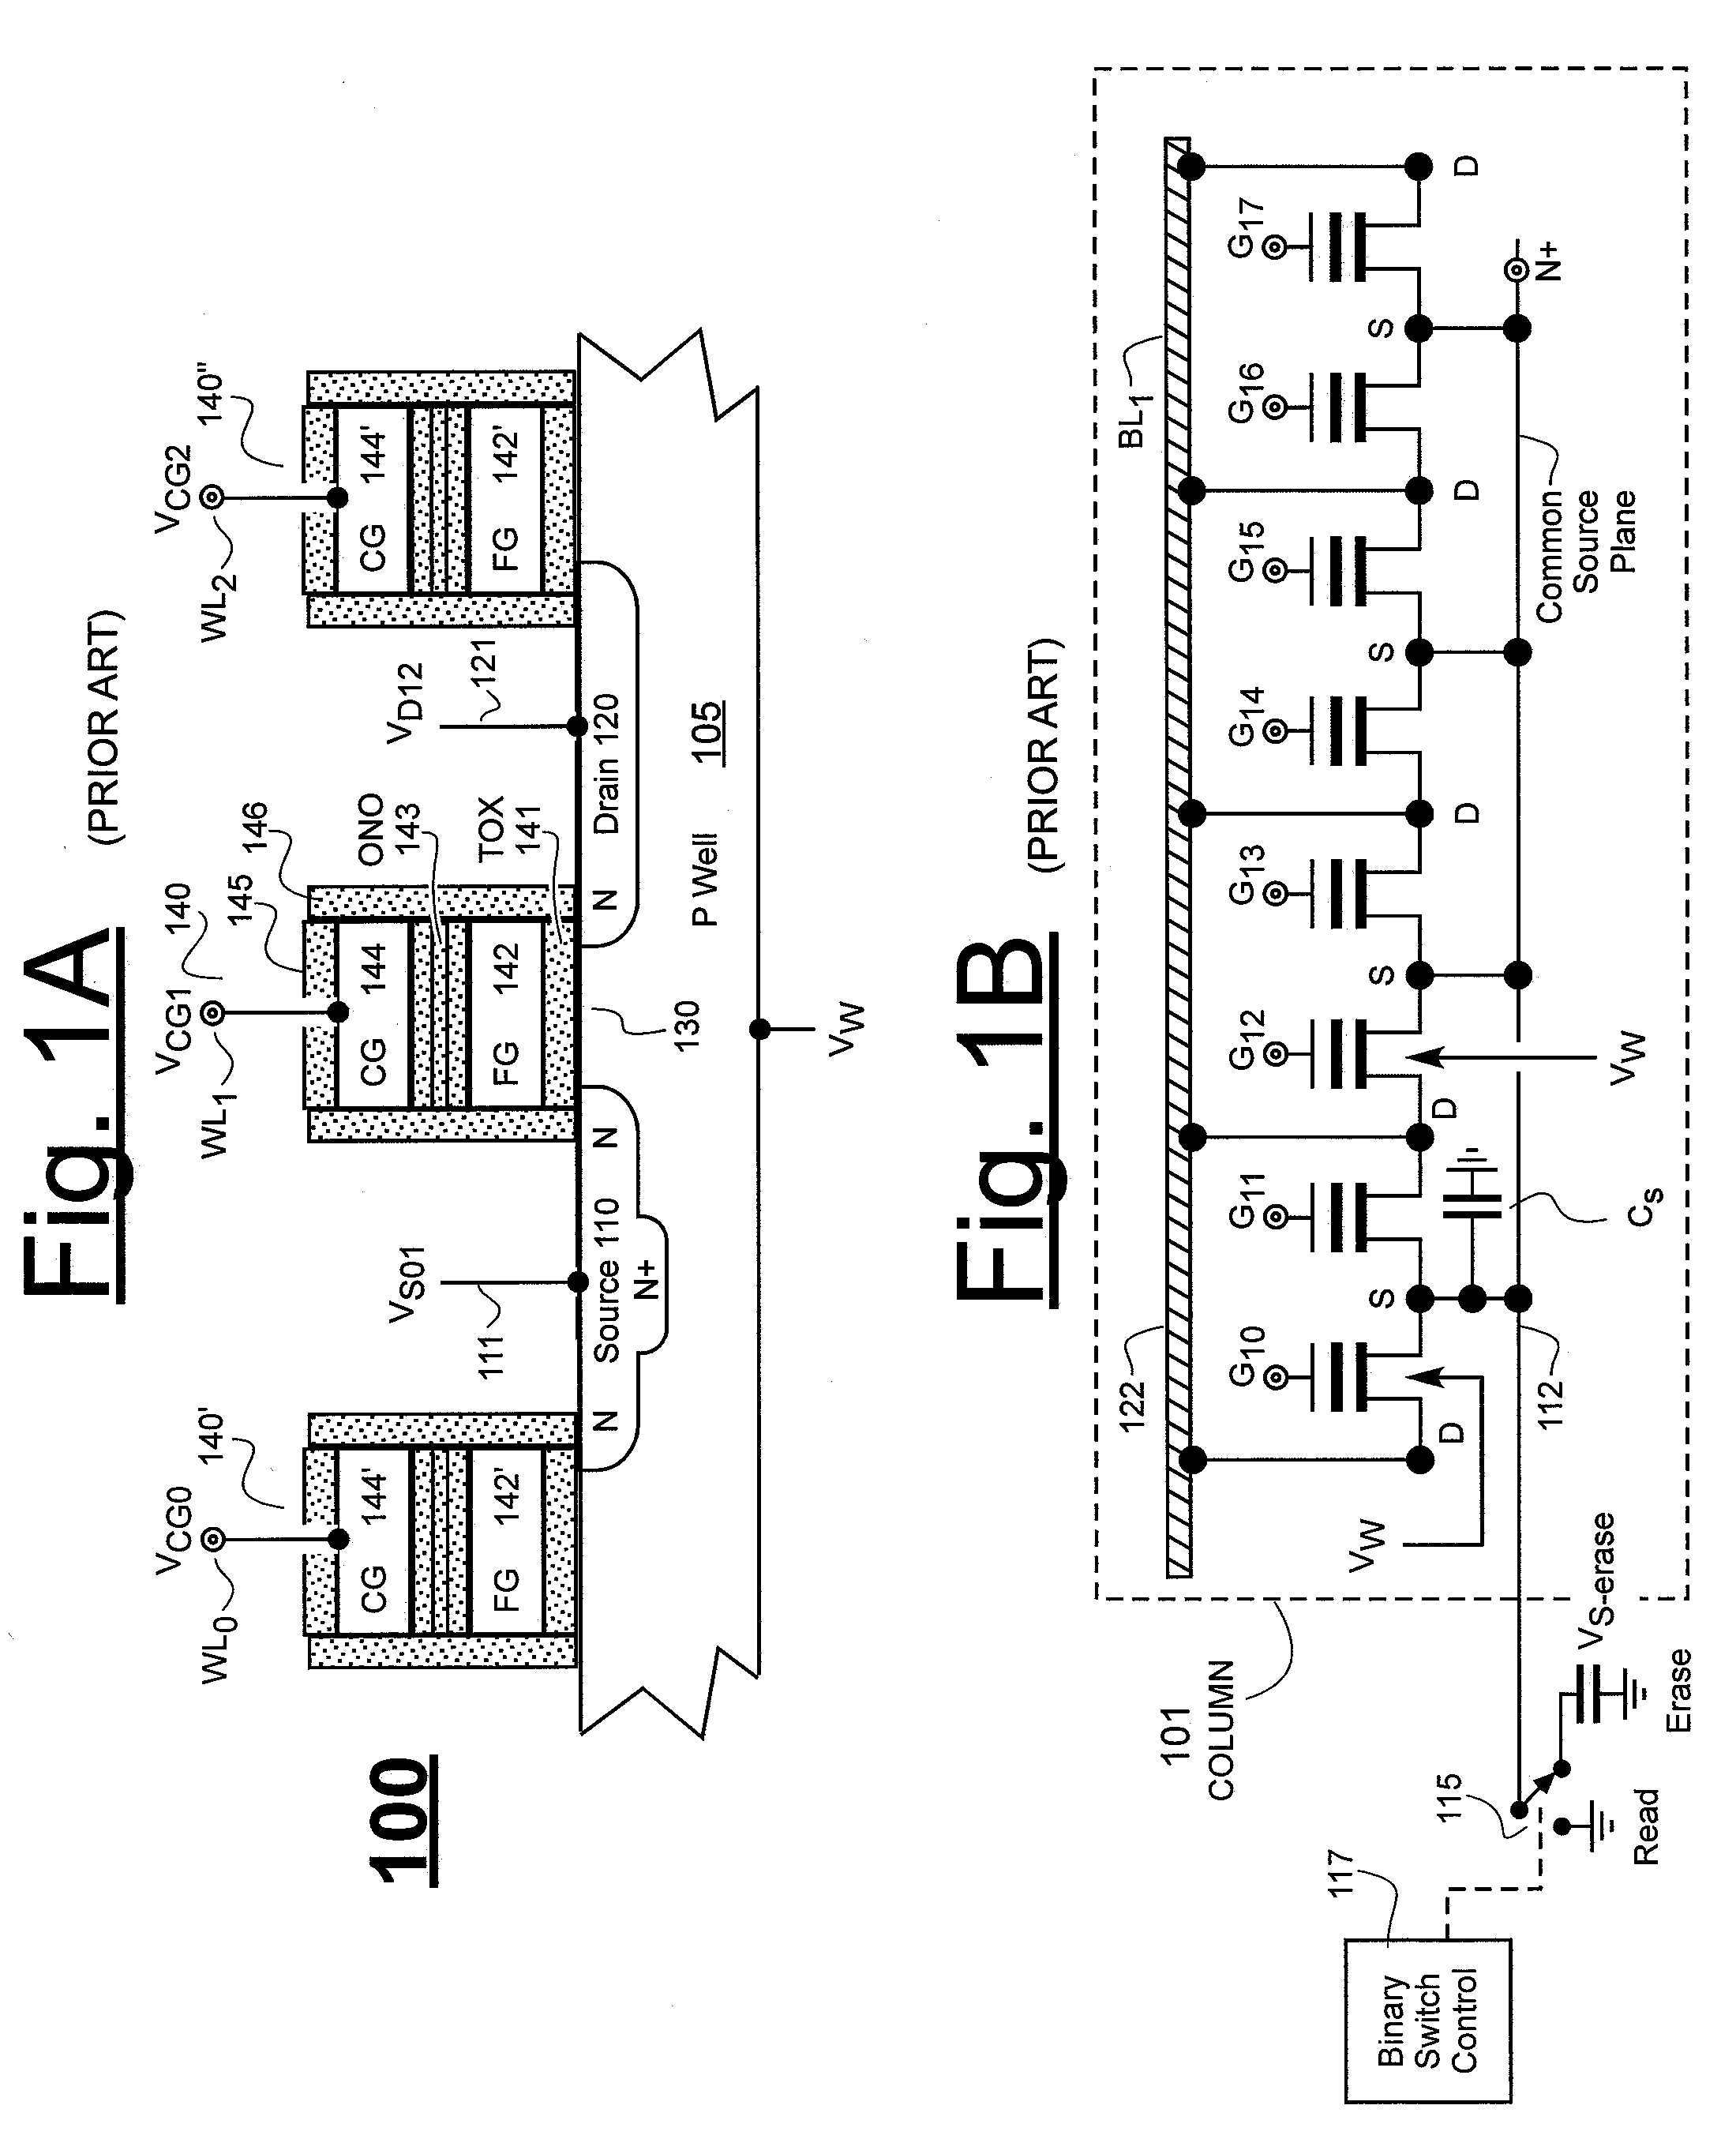 Source biasing of nor-type flash array with dynamically variable source resistance